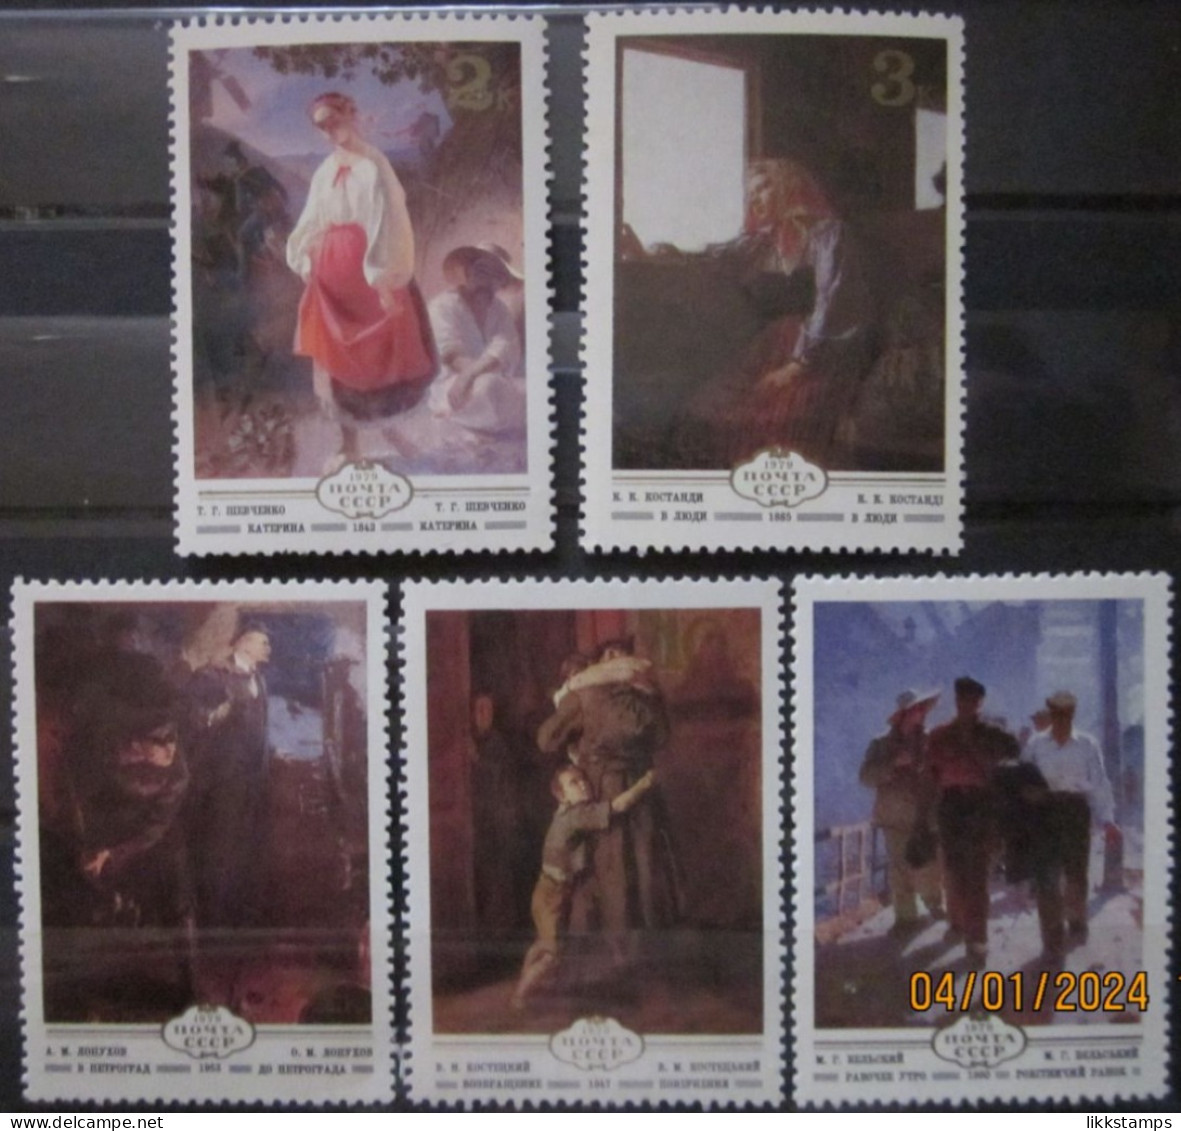 RUSSIA ~ 1979 ~ S.G. NUMBERS 4935 - 4939, ~ PAINTINGS. ~ MNH #03603 - Neufs